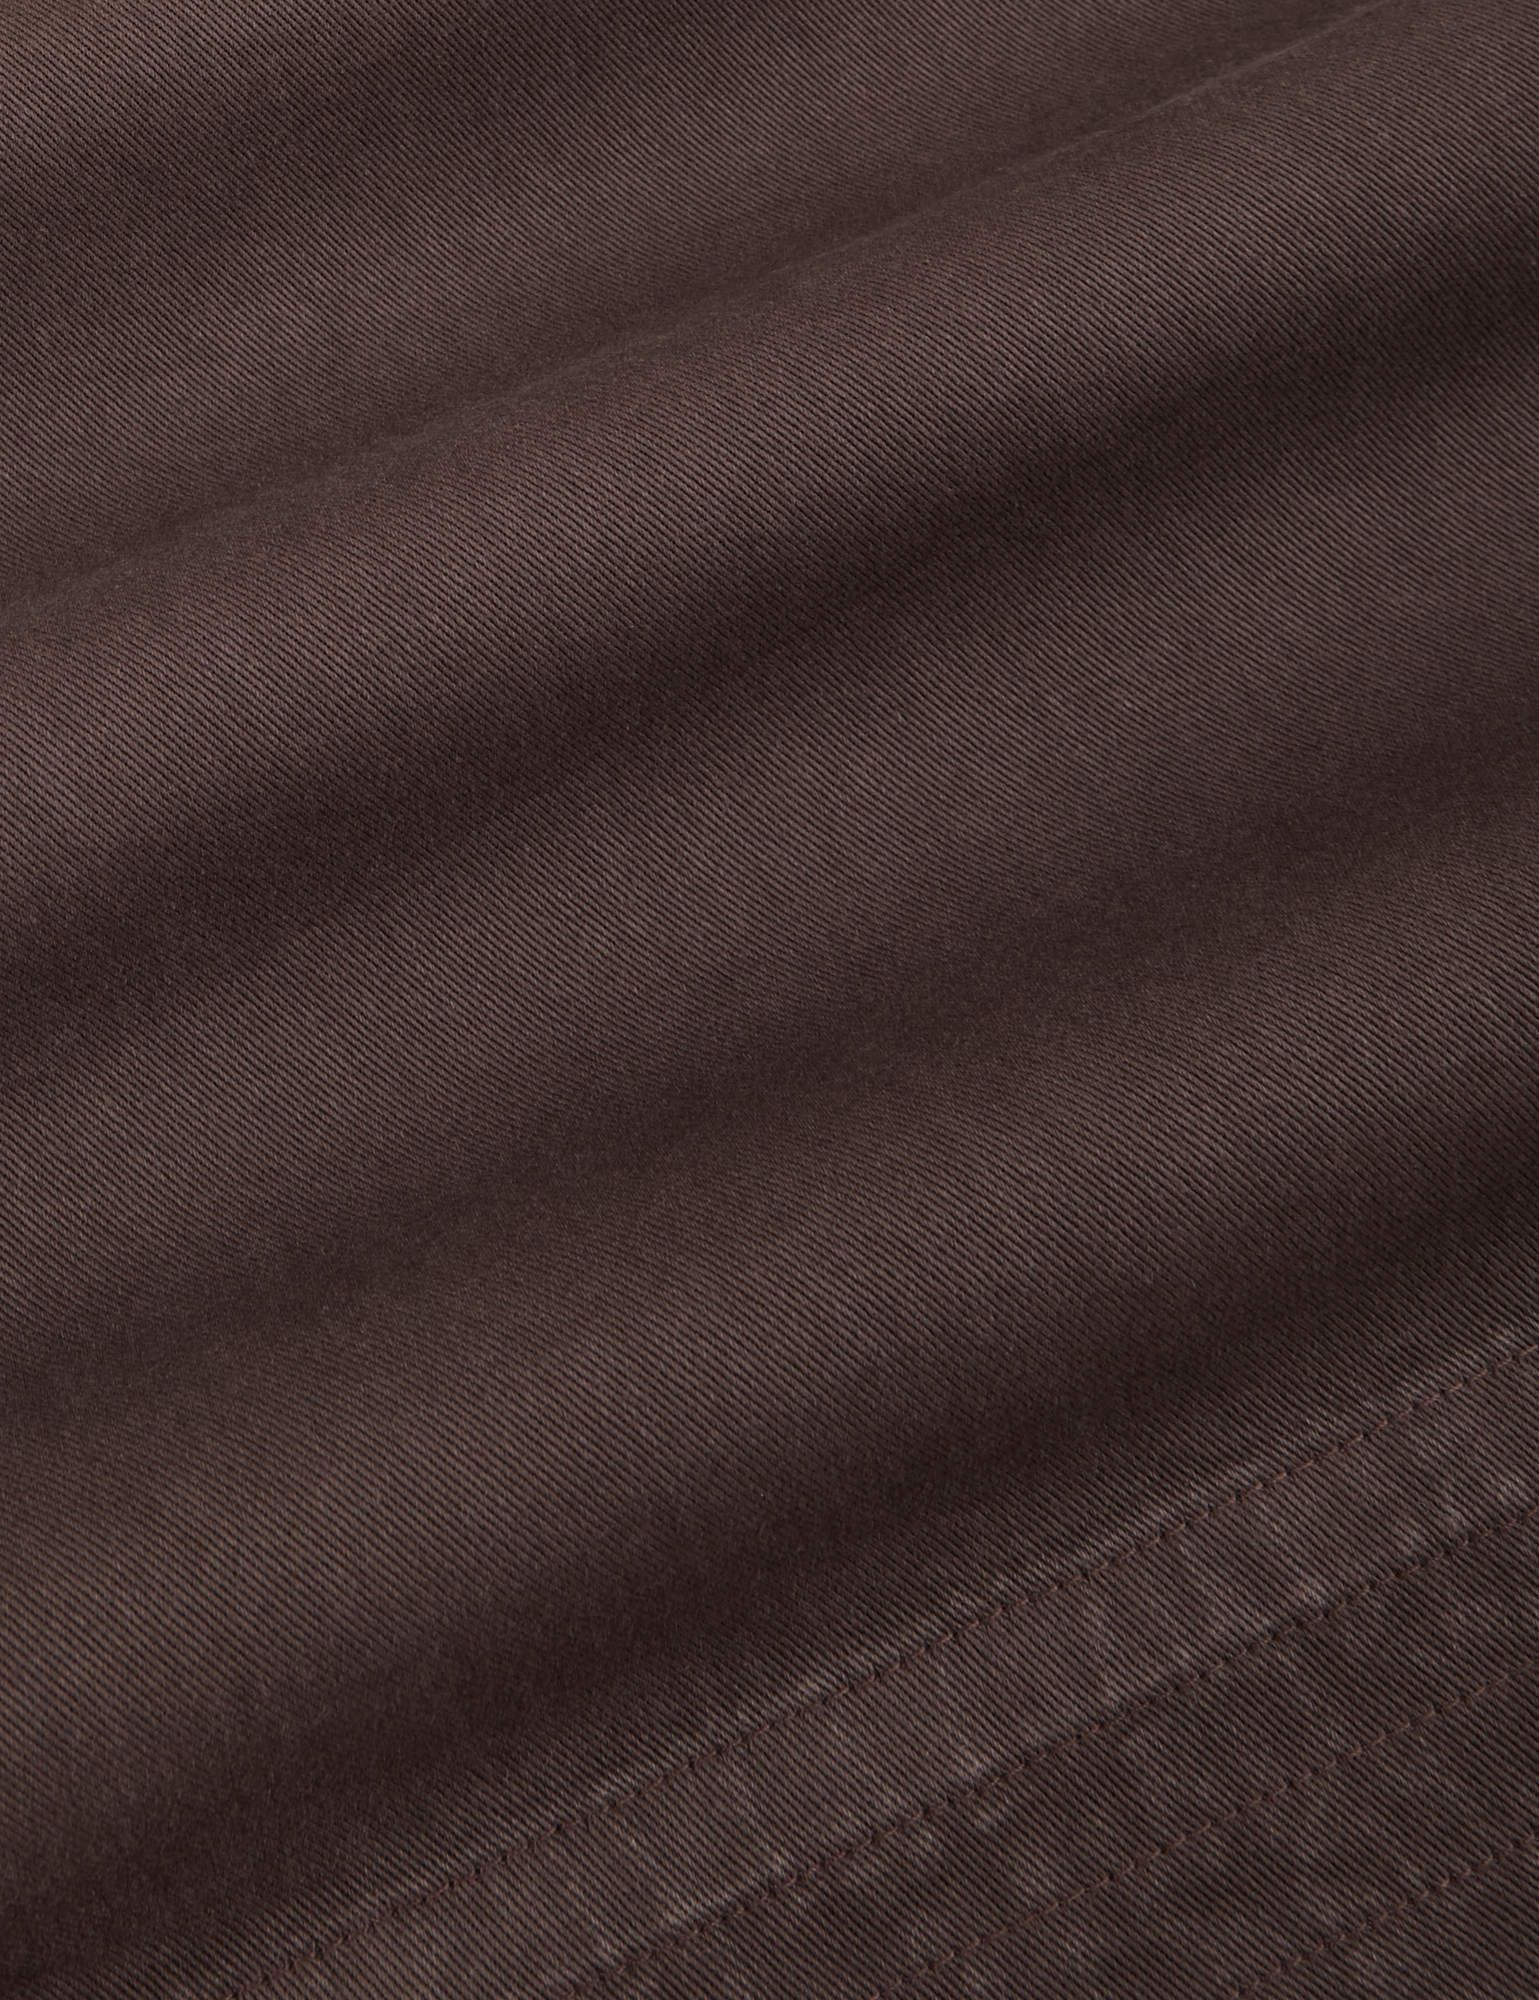 Action Pants in Espresso Brown fabric detail close up